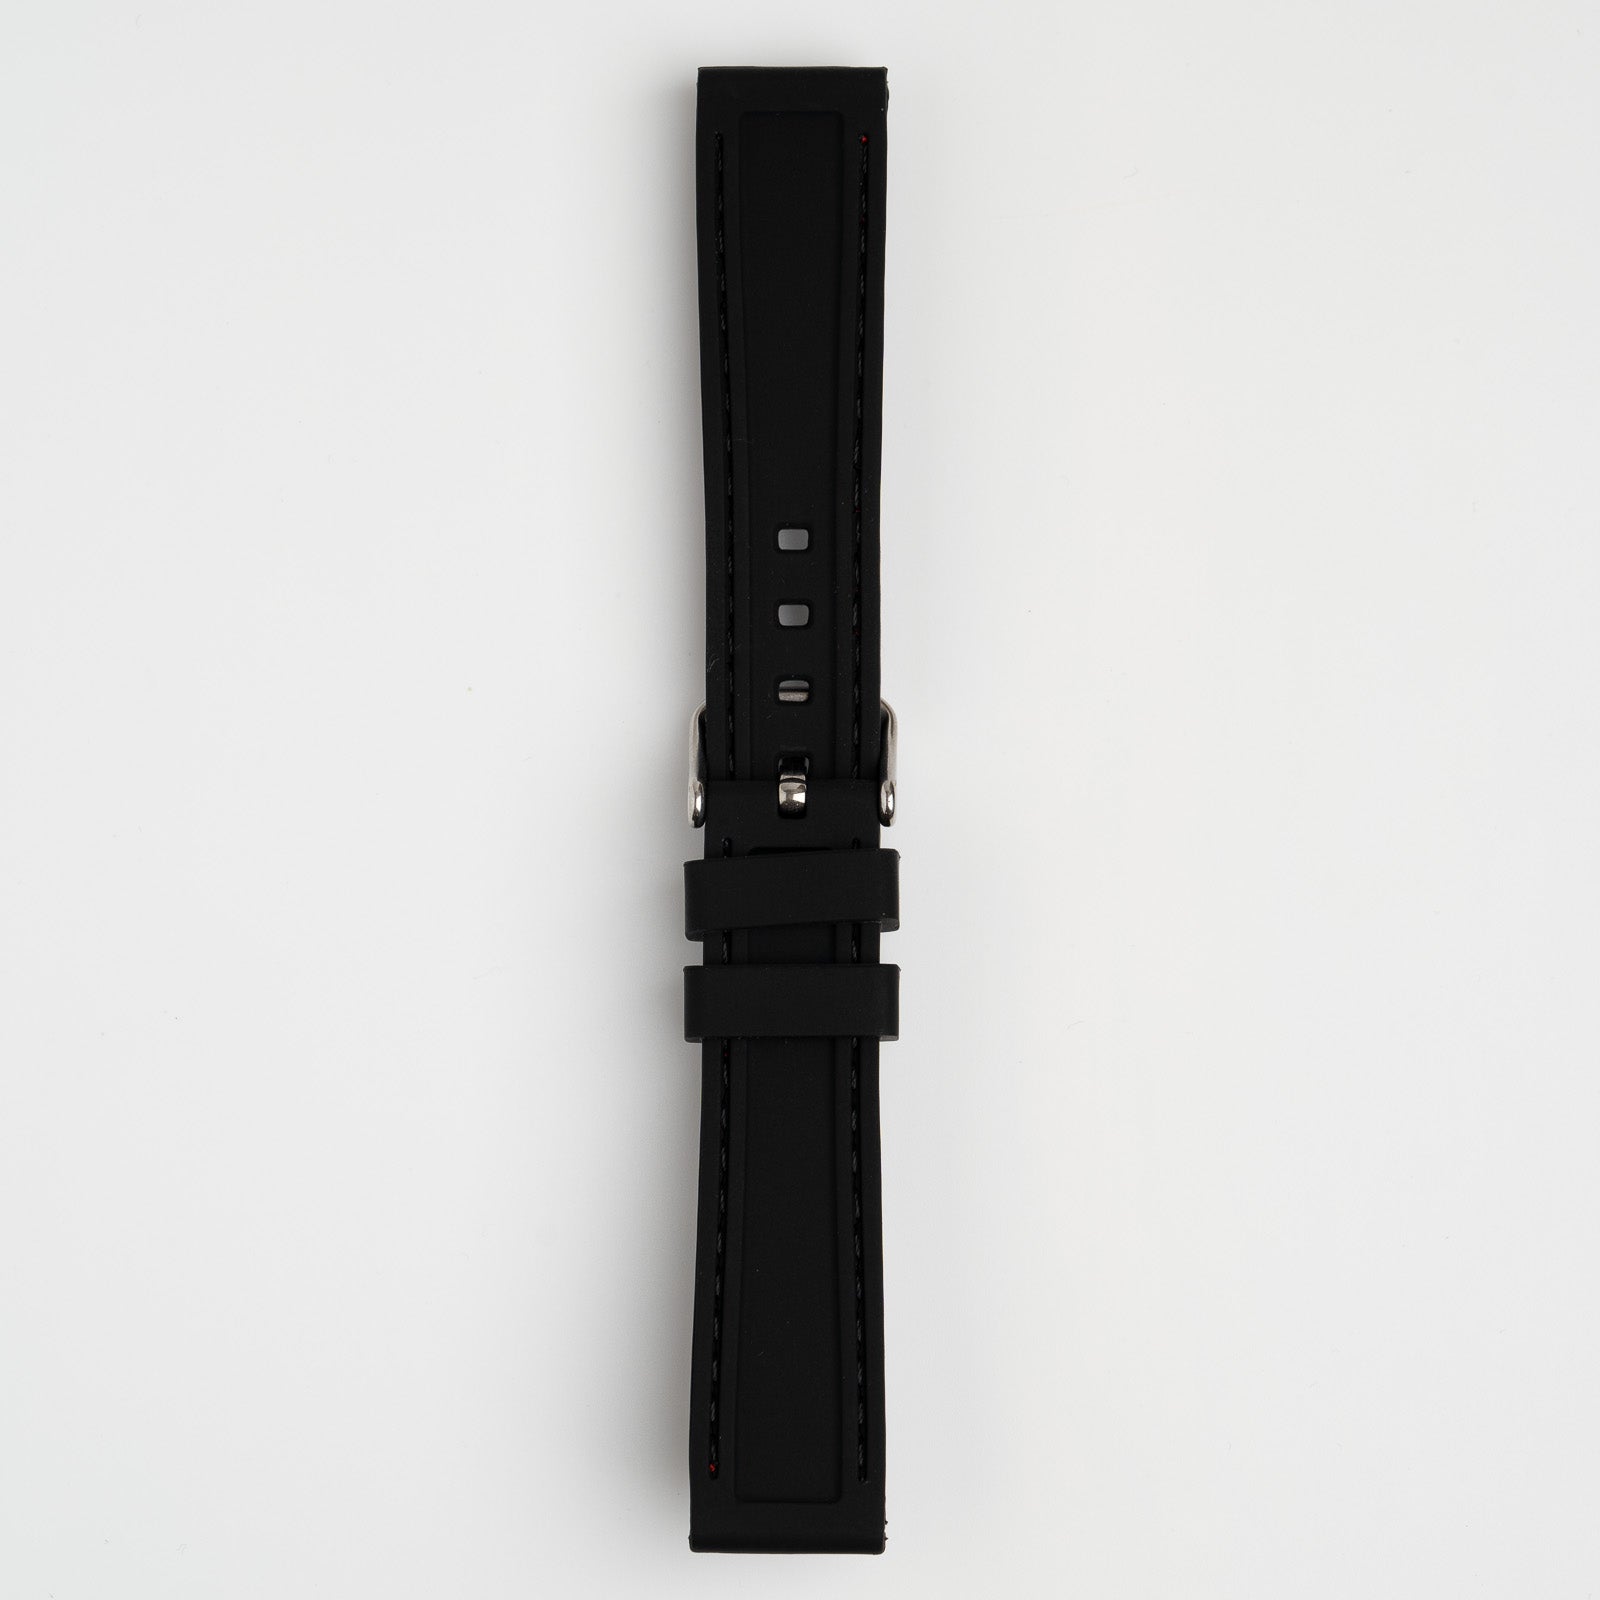 Submerge Extent Black & Red Watch Strap